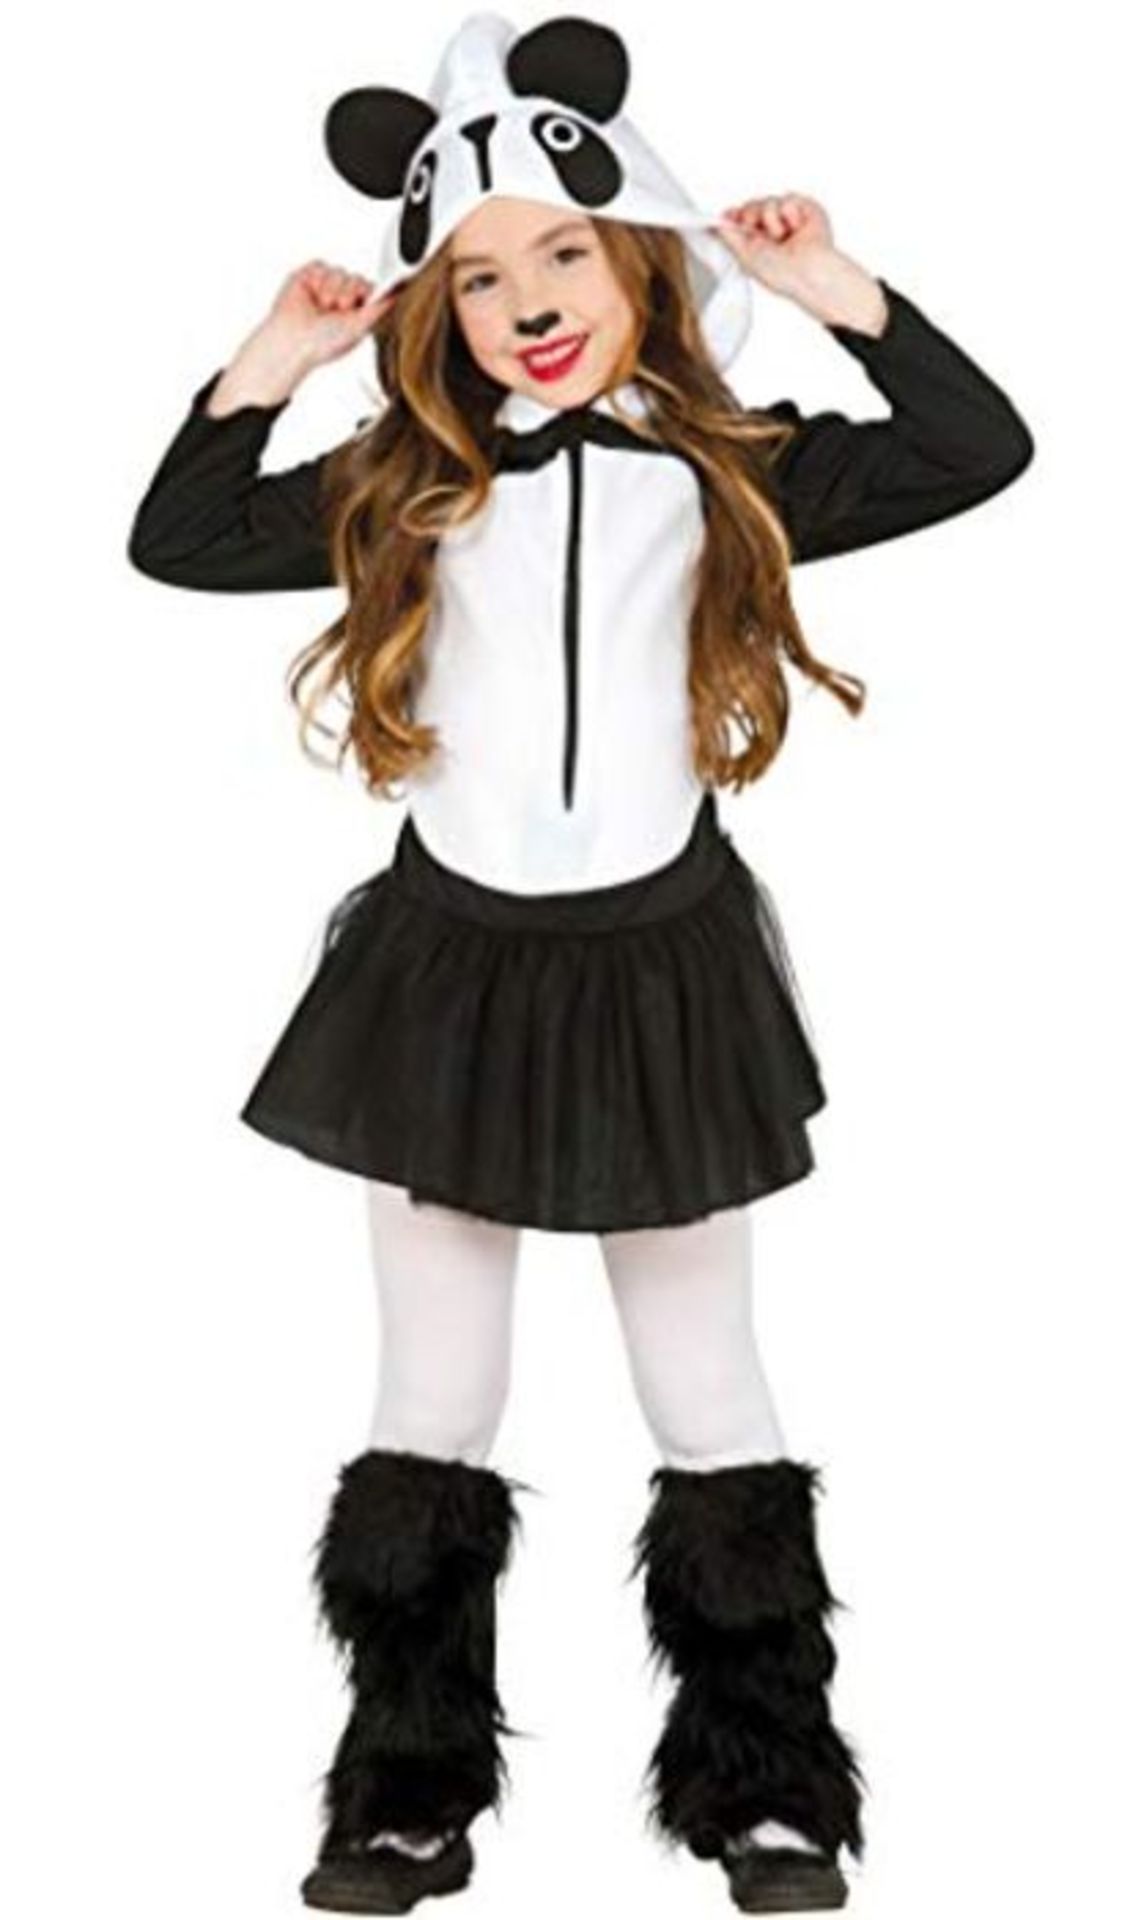 Adorable Panda Bear Costume Does not include all other accessories and accessories S